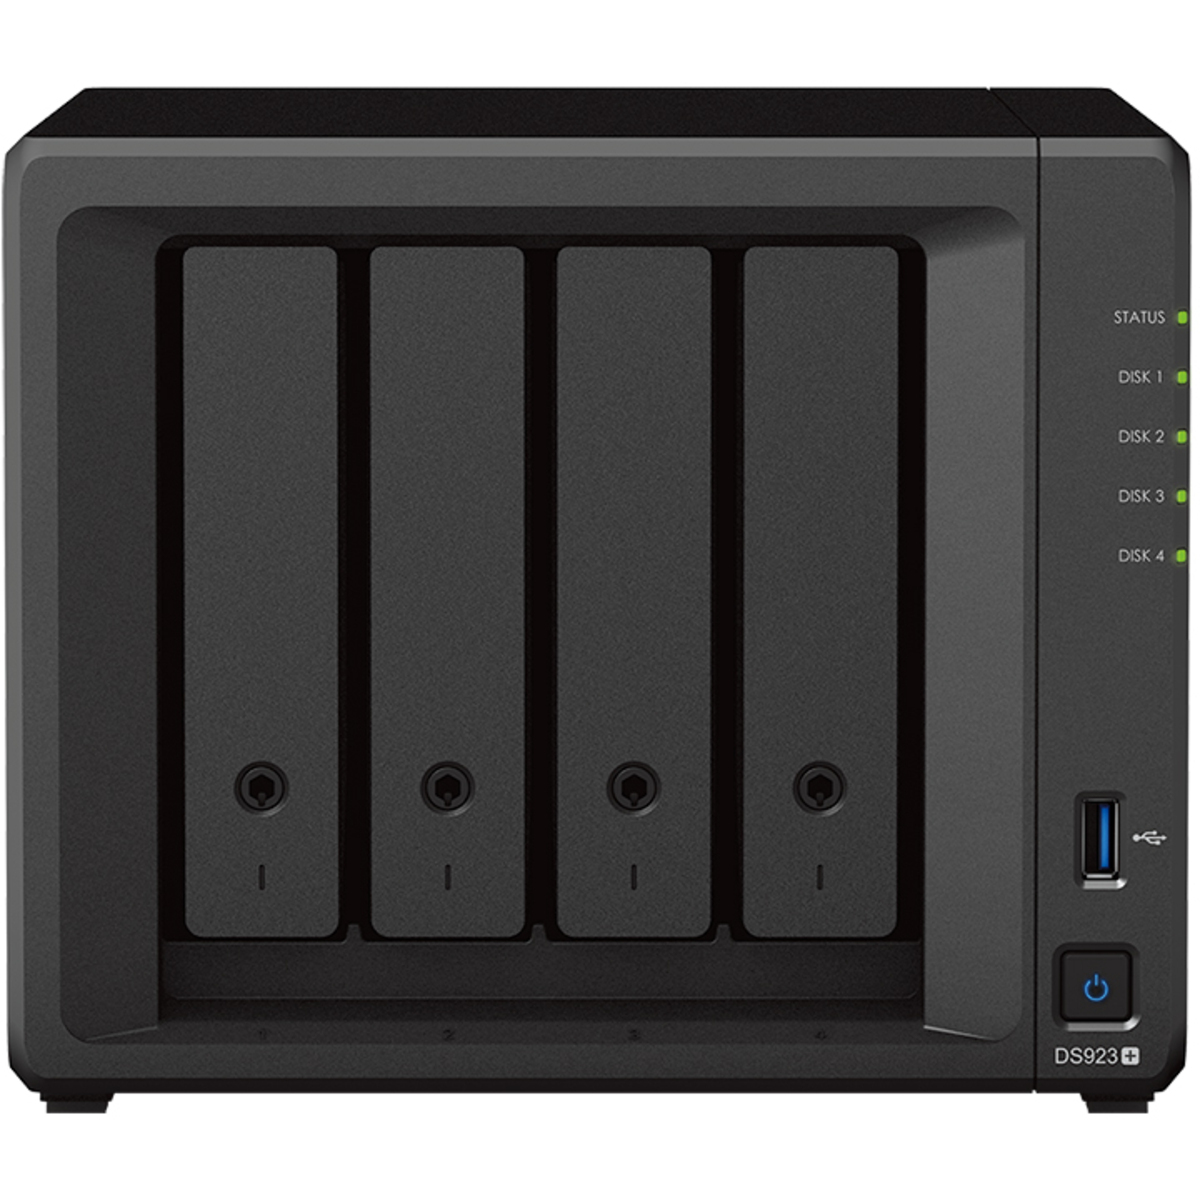 buy Synology DiskStation DS923+ 16tb Desktop NAS - Network Attached Storage Device 2x8000gb Western Digital Gold WD8004FRYZ 3.5 7200rpm SATA 6Gb/s HDD ENTERPRISE Class Drives Installed - Burn-In Tested - FREE RAM UPGRADE - nas headquarters buy network attached storage server device das new raid-5 free shipping simply usa christmas holiday black friday cyber monday week sale happening now! DiskStation DS923+